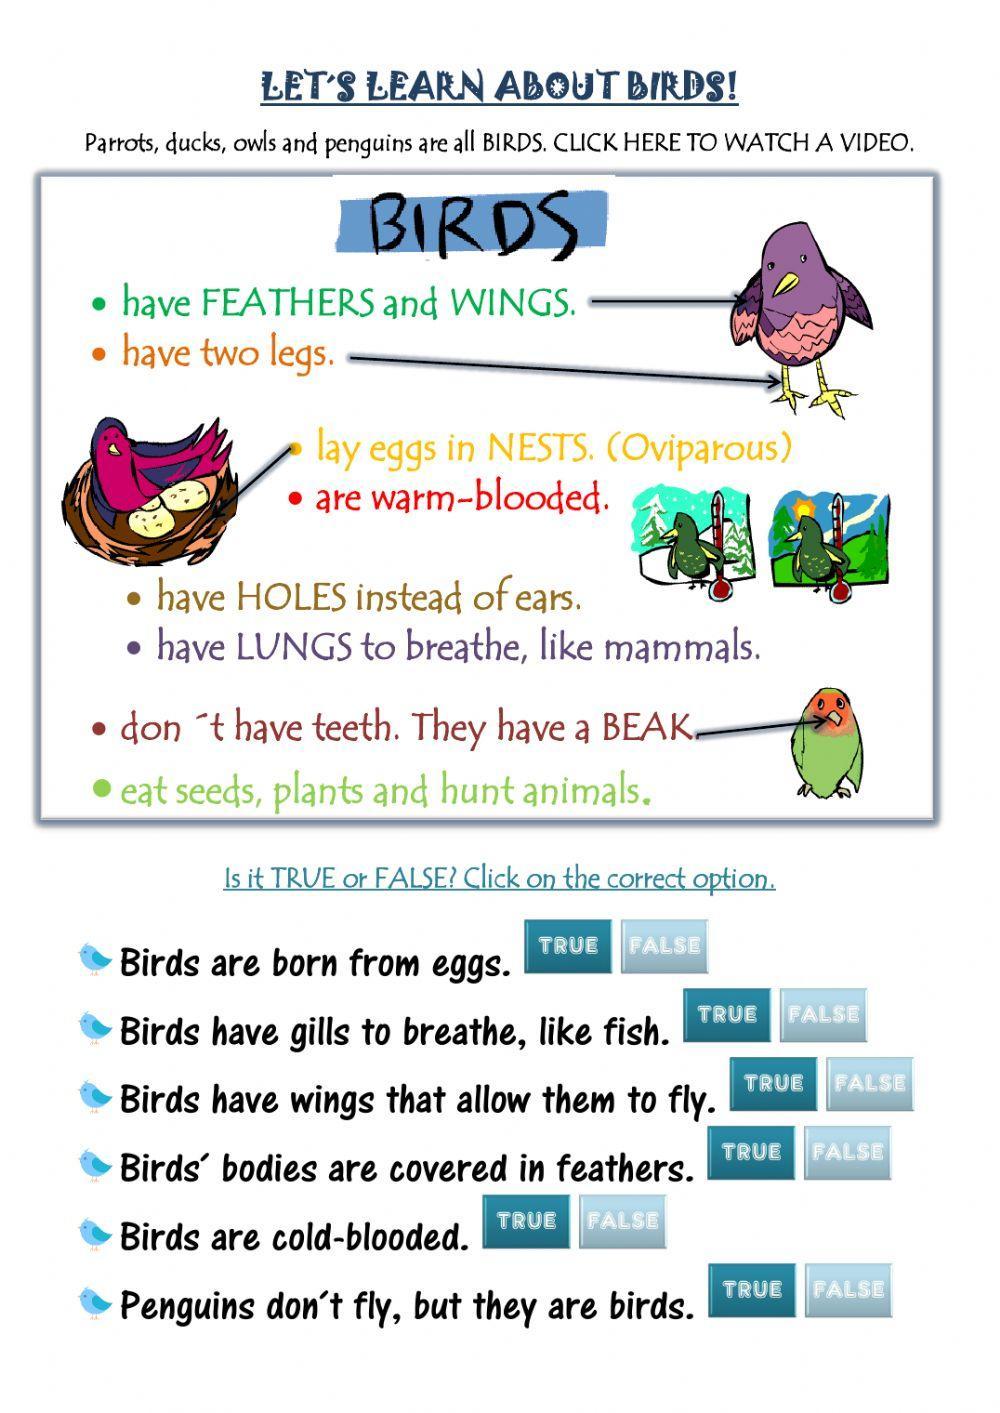 Let-s learn about birds!